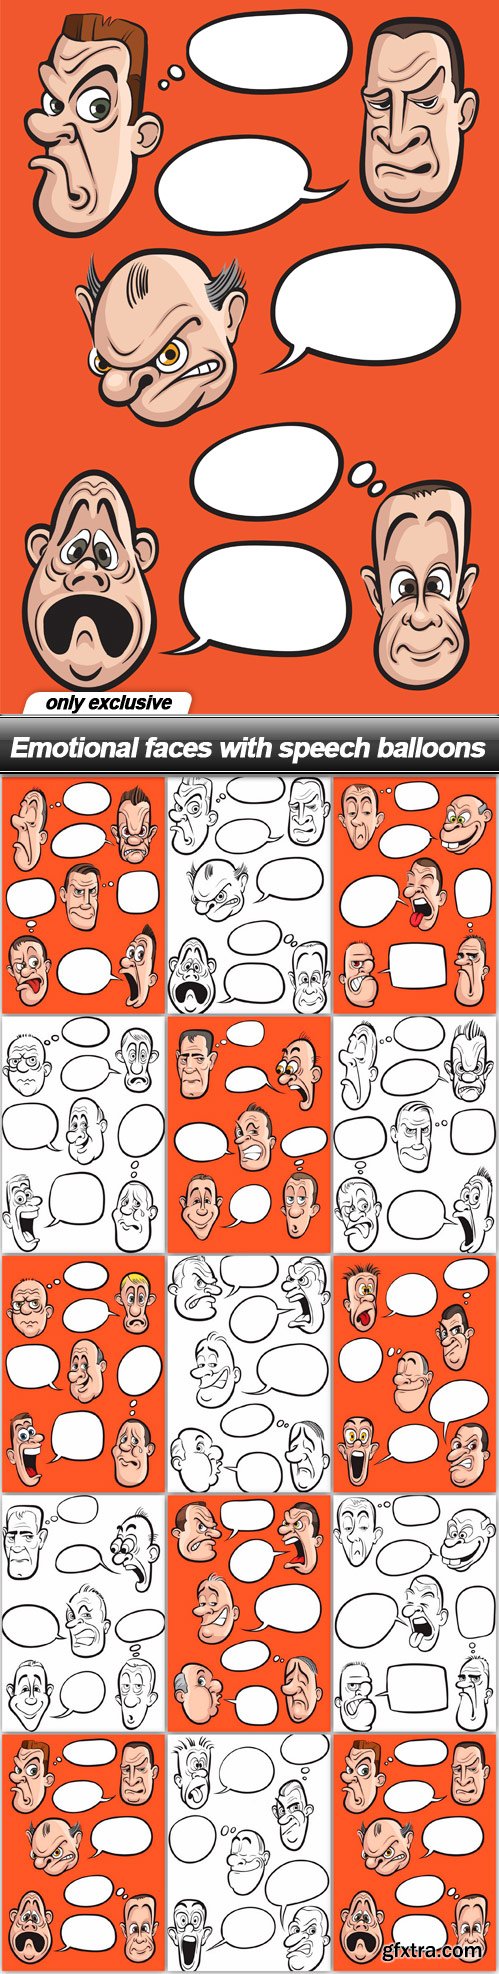 Emotional faces with speech balloons - 14 EPS